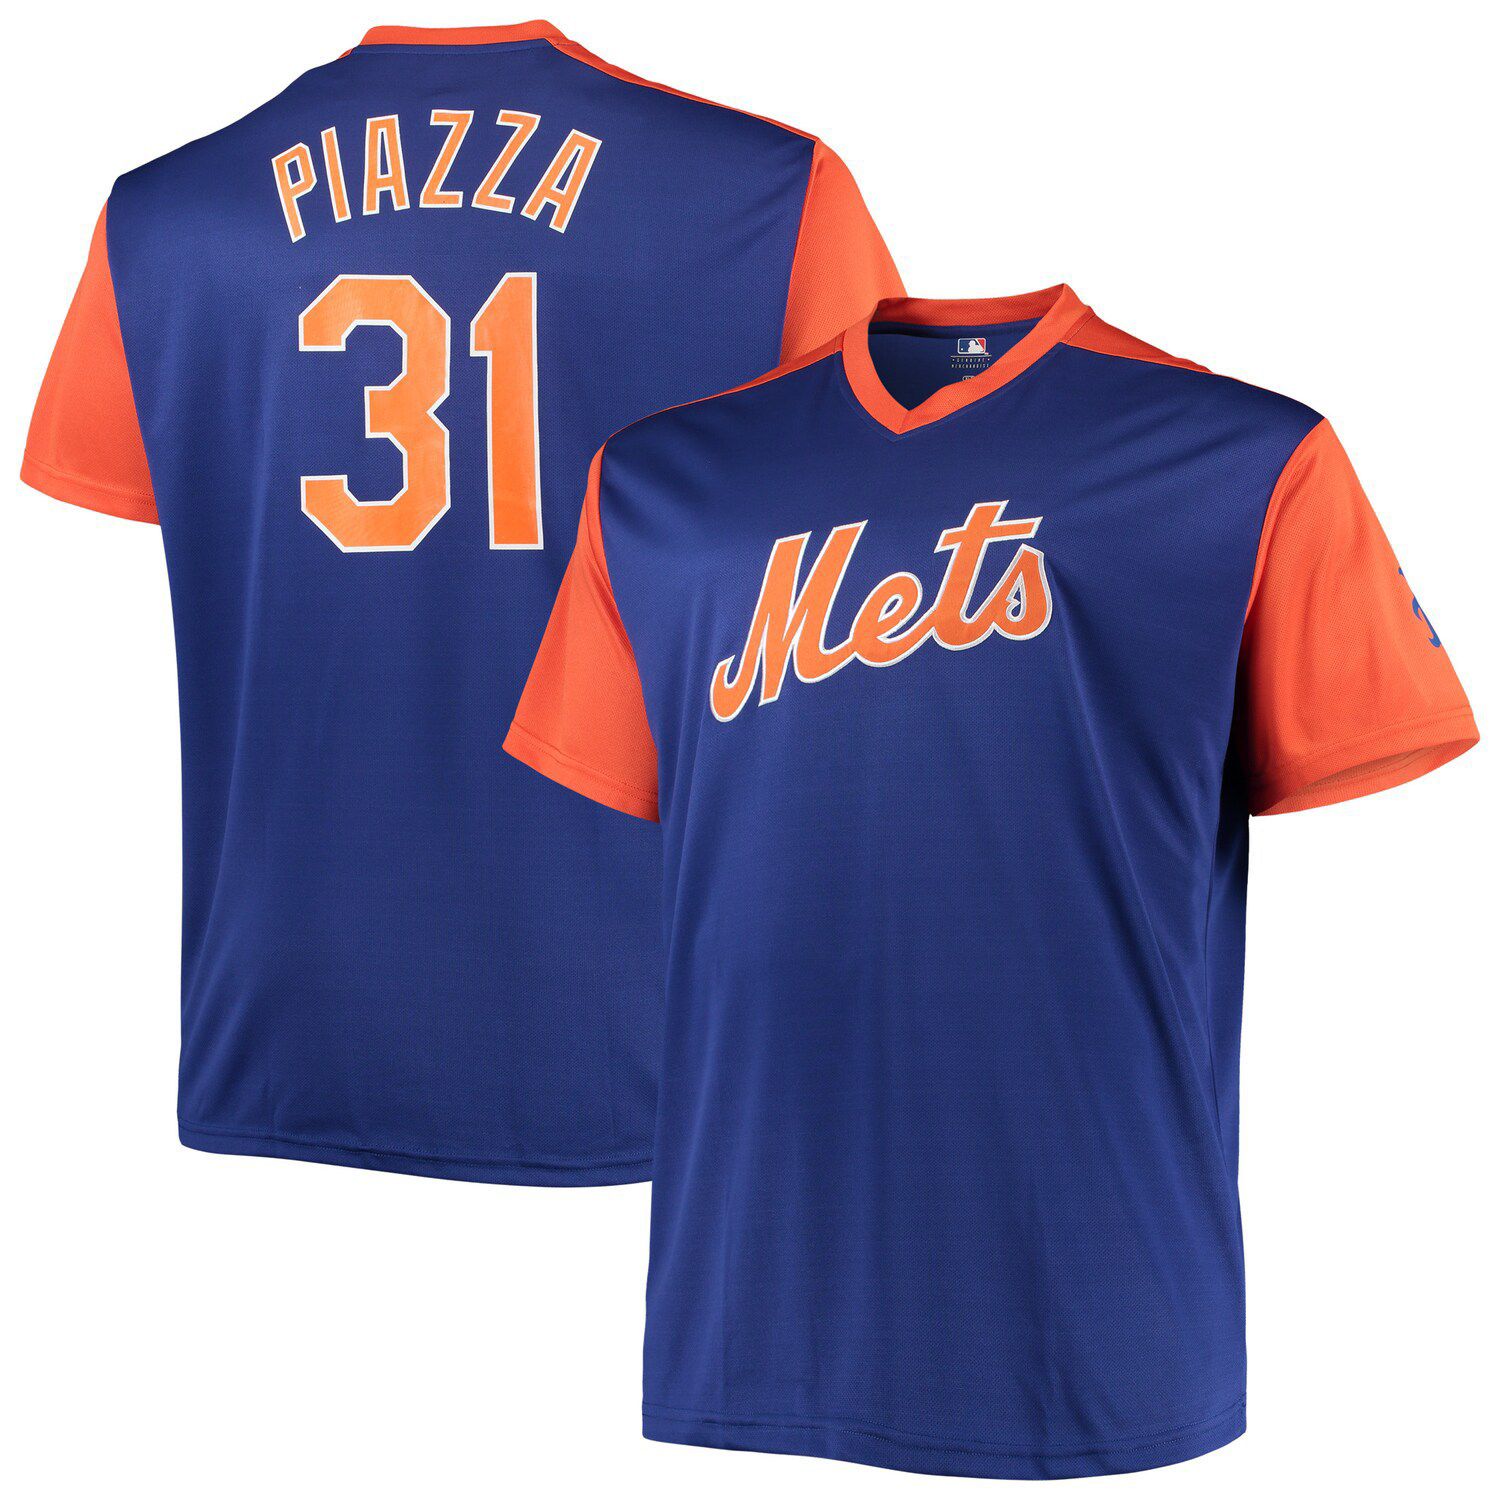 Vintage New York Mets Mike Piazza Baseball Jersey Black Mens Size 3X Sewn